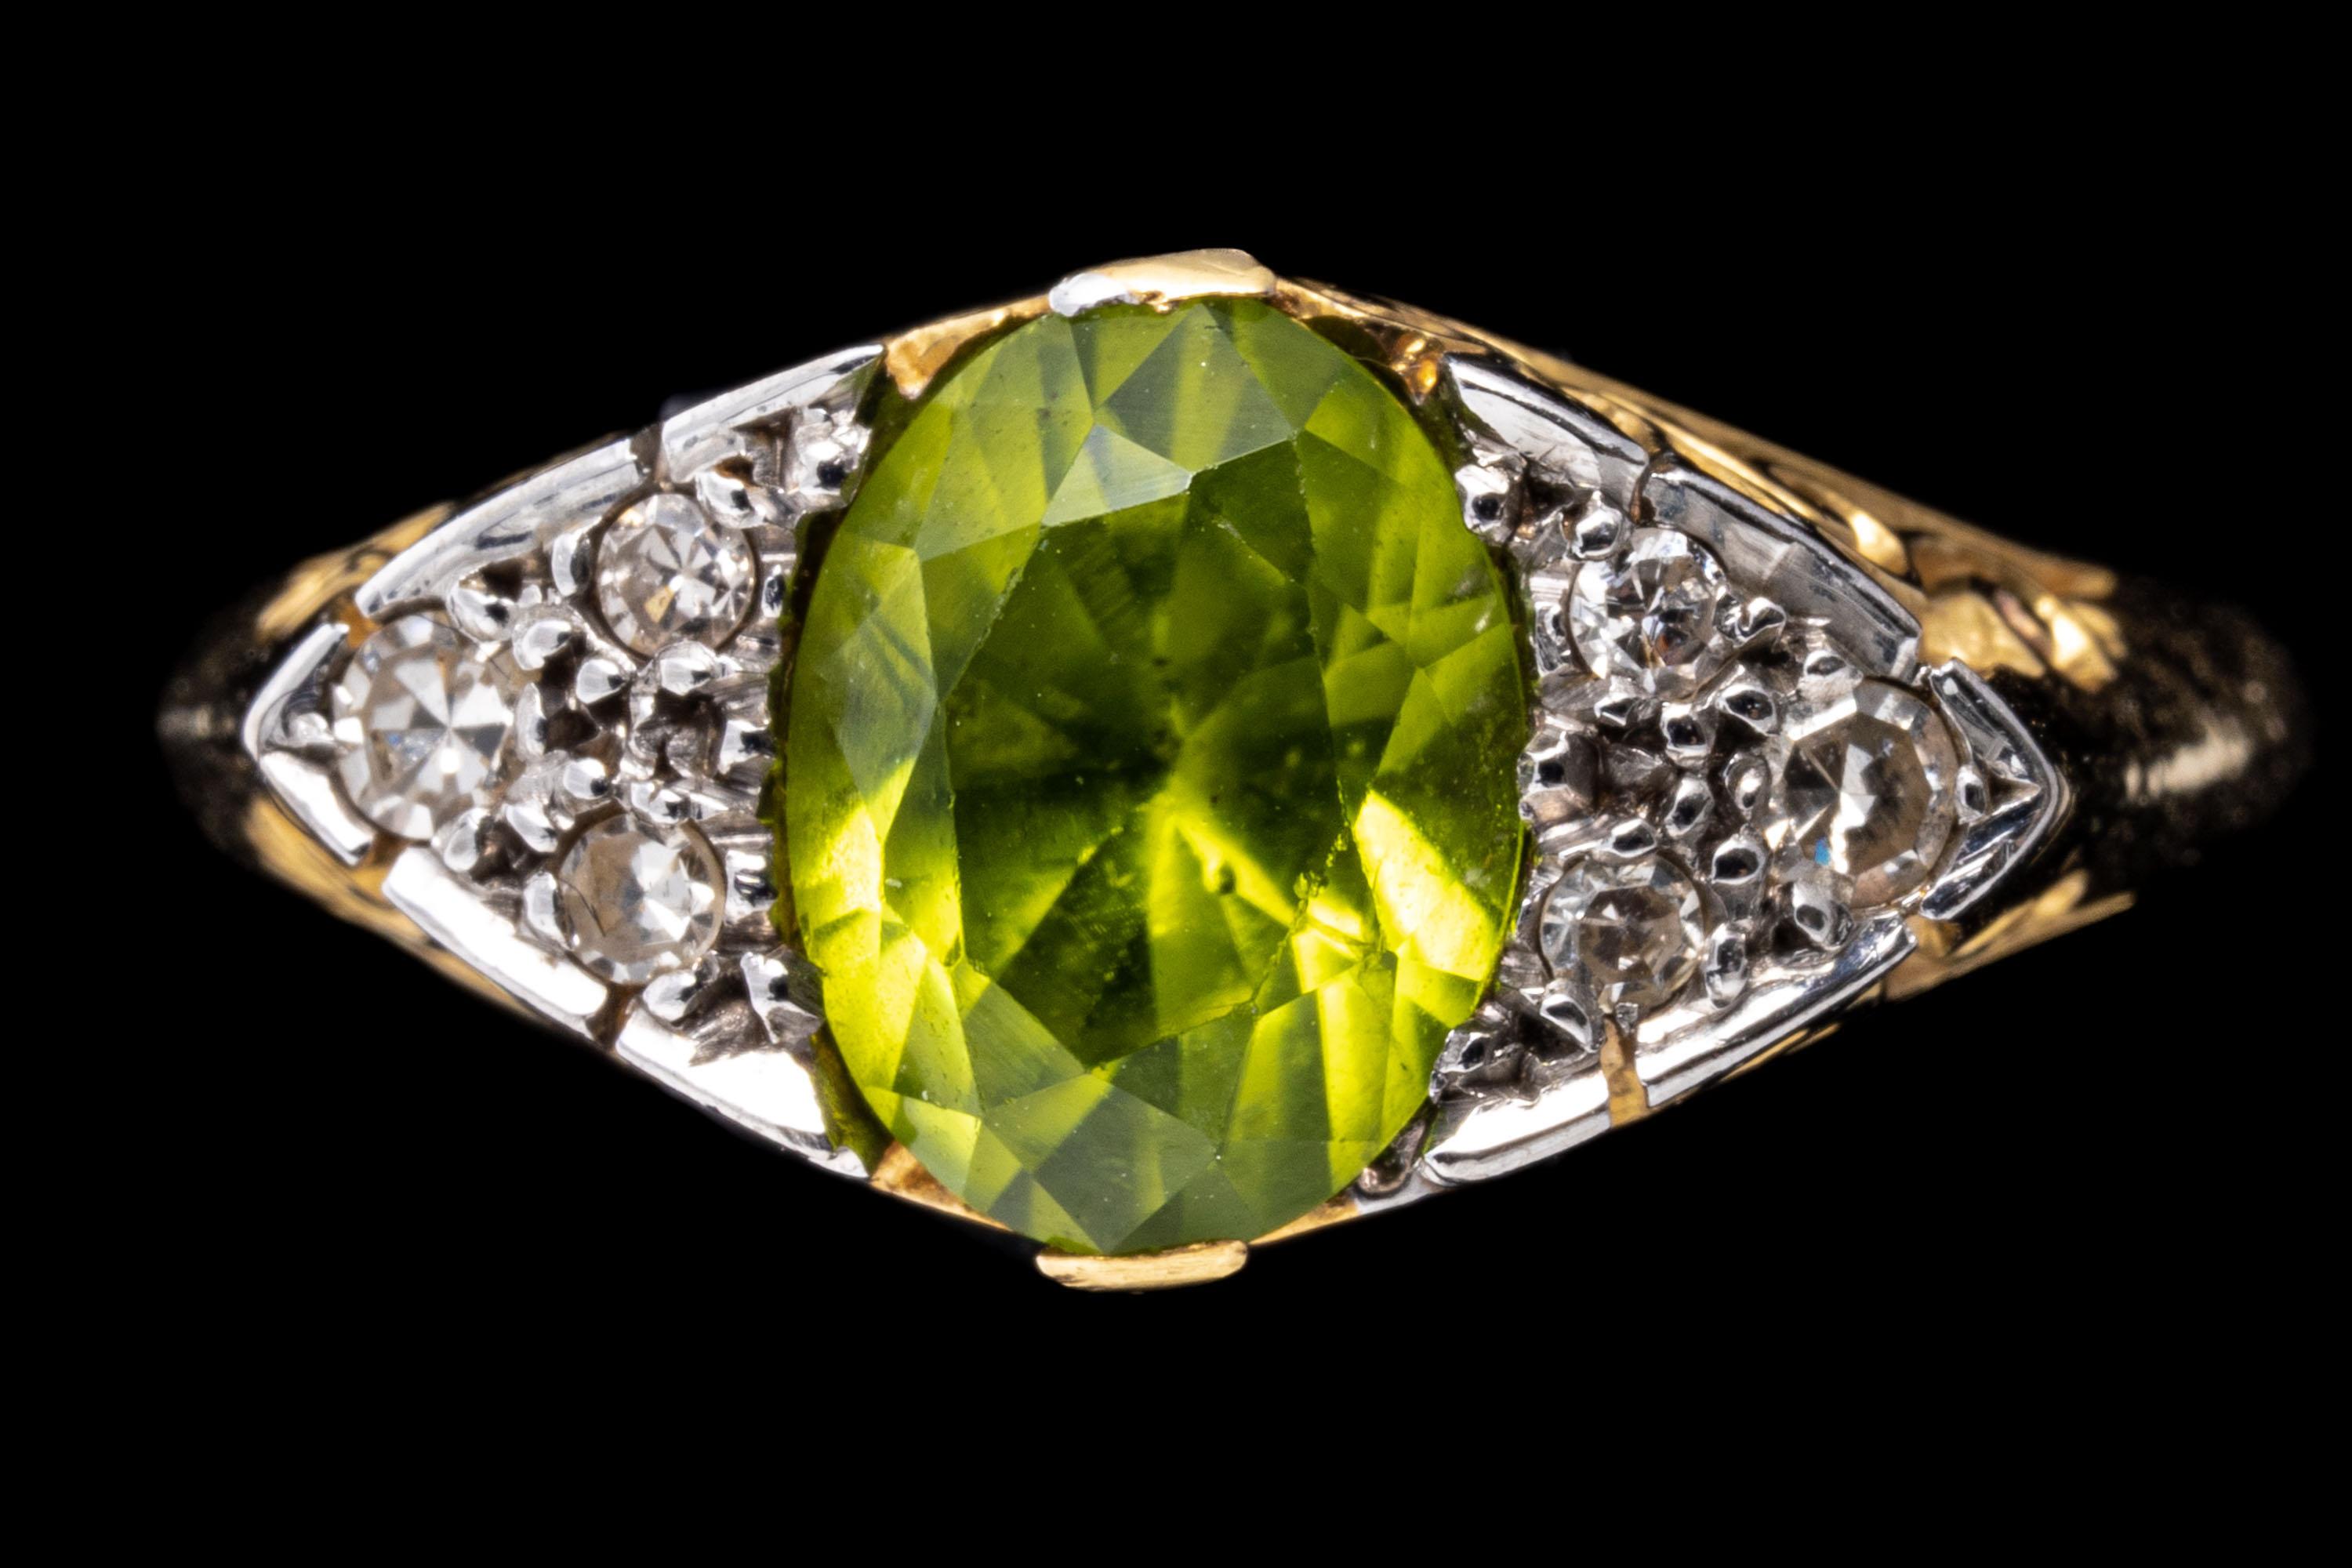 18k yellow gold ring. This classic yellow gold ring has an oval faceted, green peridot center, approximately 1.39 CTS and flanked by a cluster of three round faceted diamonds, approximately 0.06 TCW, prong set, and finished by a scroll work